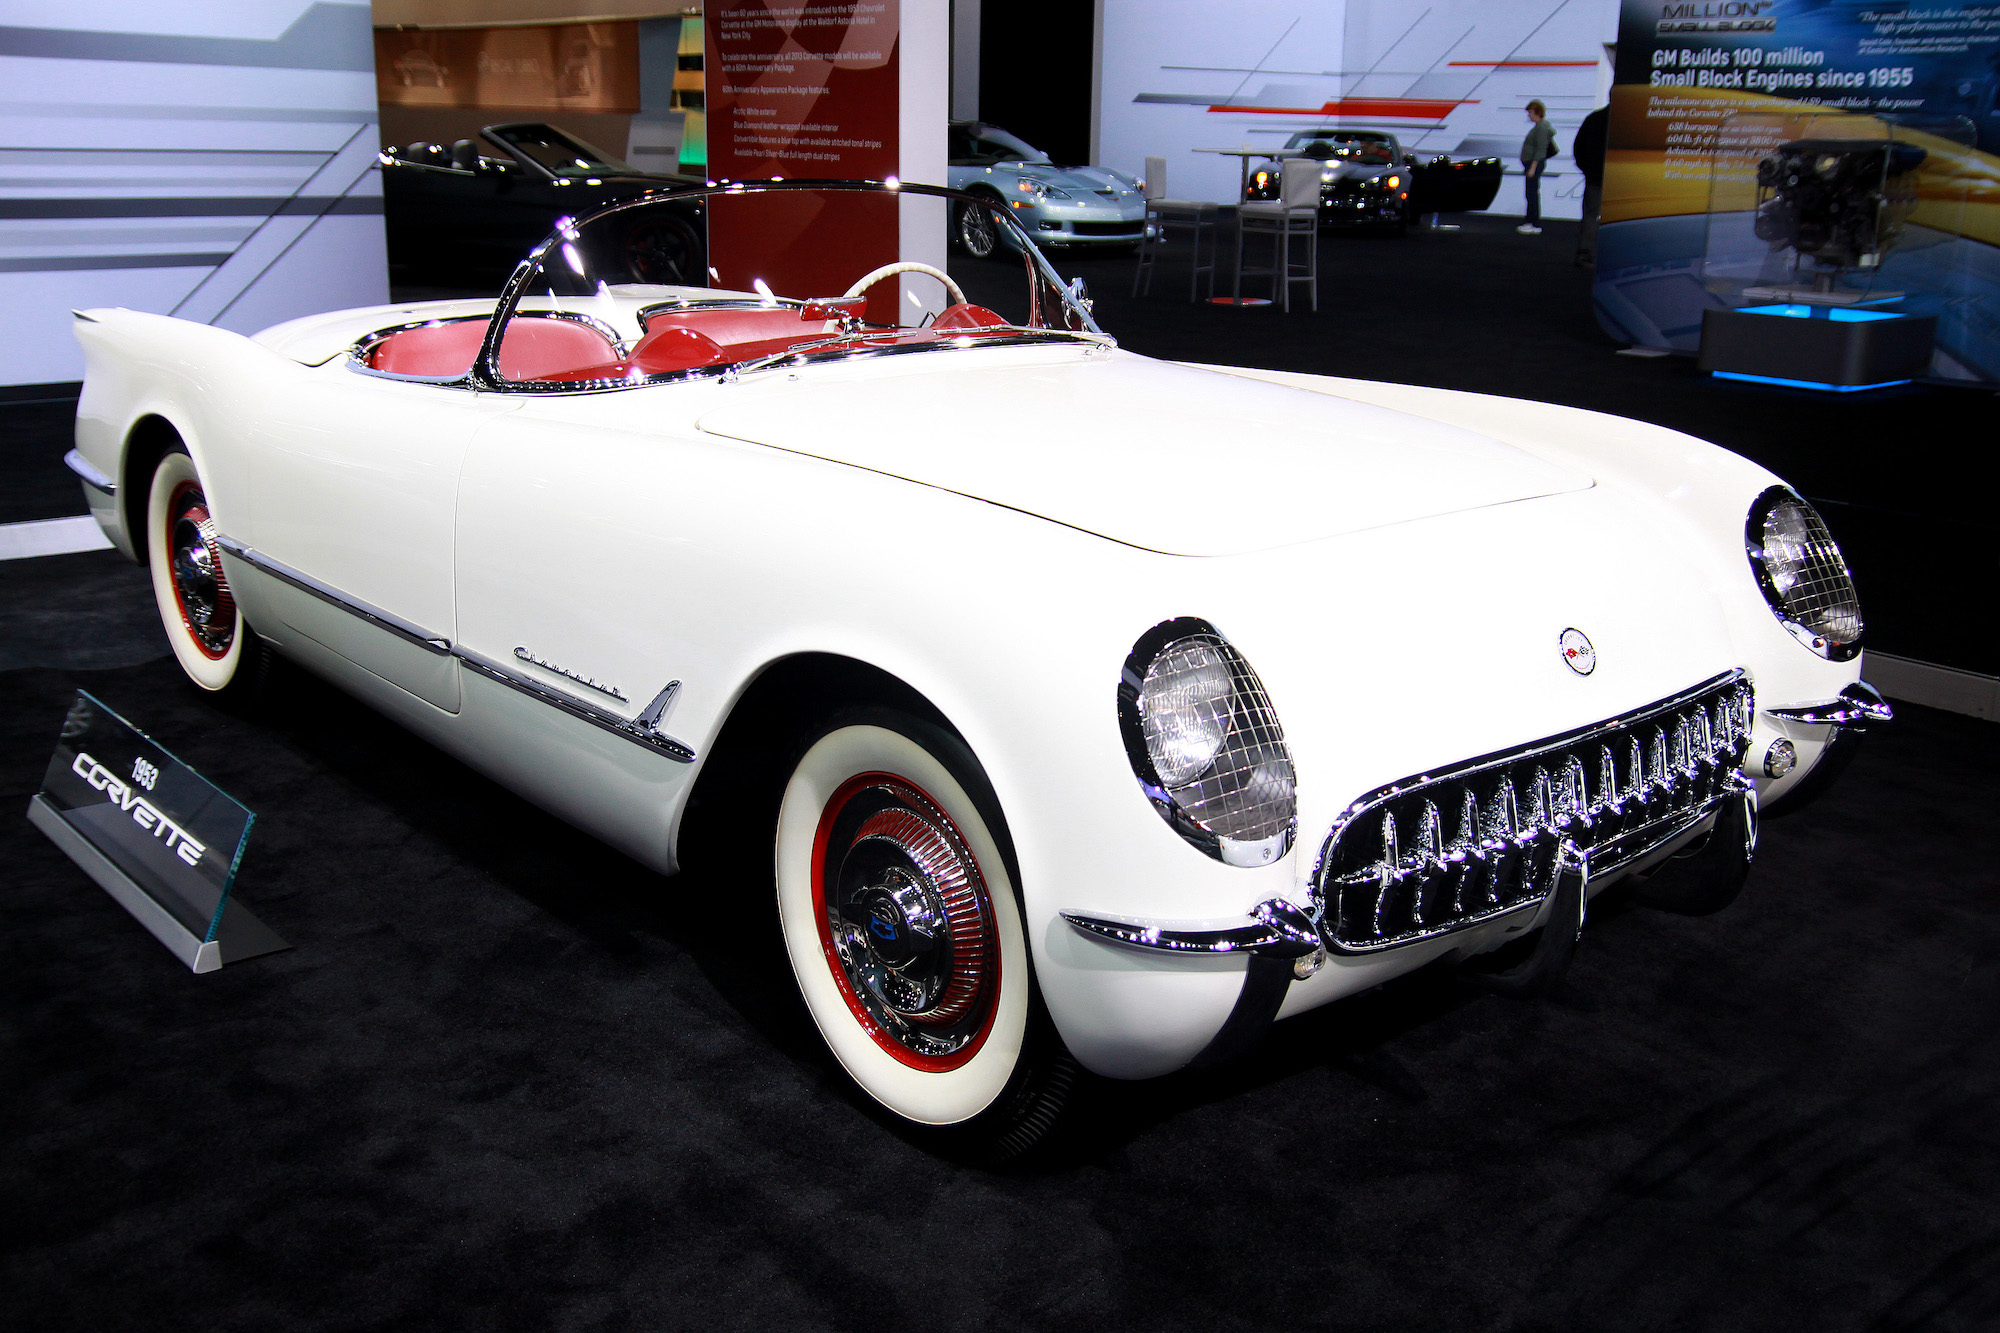 A white 1953 Chevy Corvette on display at the 104th-annual Chicago Auto Show at McCormick Place in February 2012